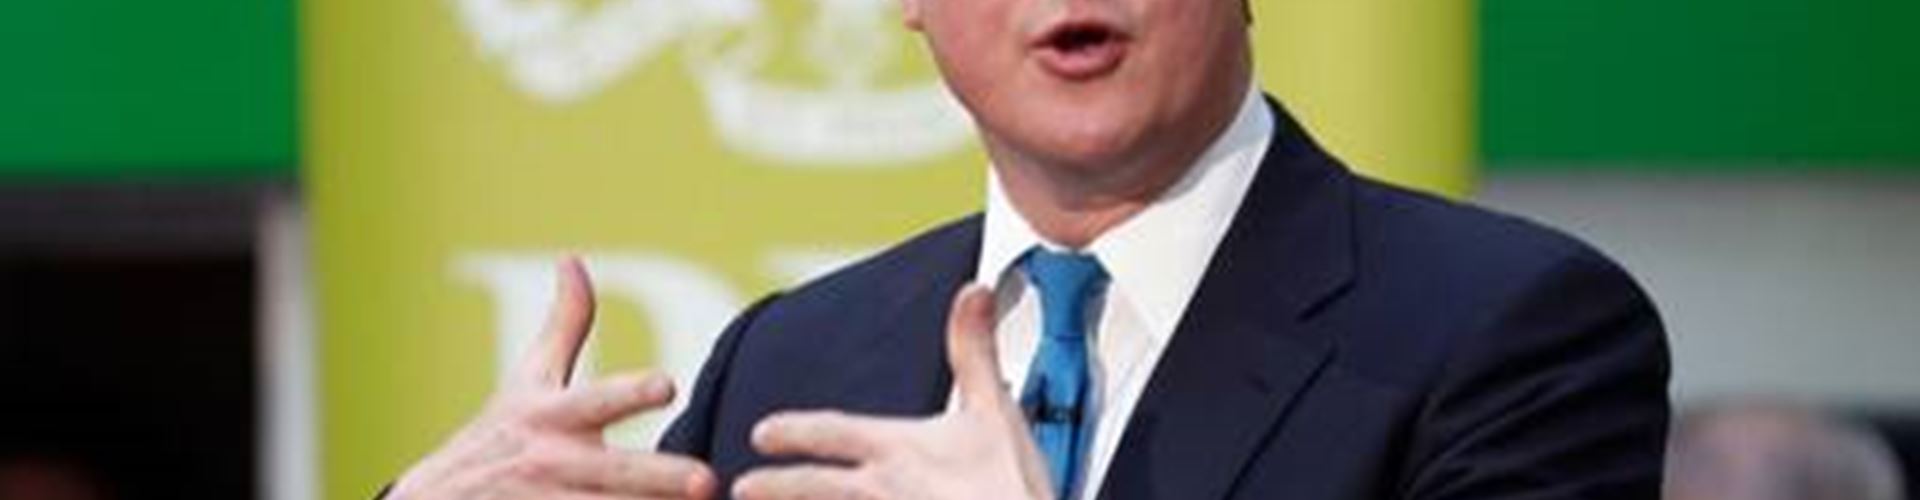 PM Cameron looks to boost Asia trade as UK economy gains momentum